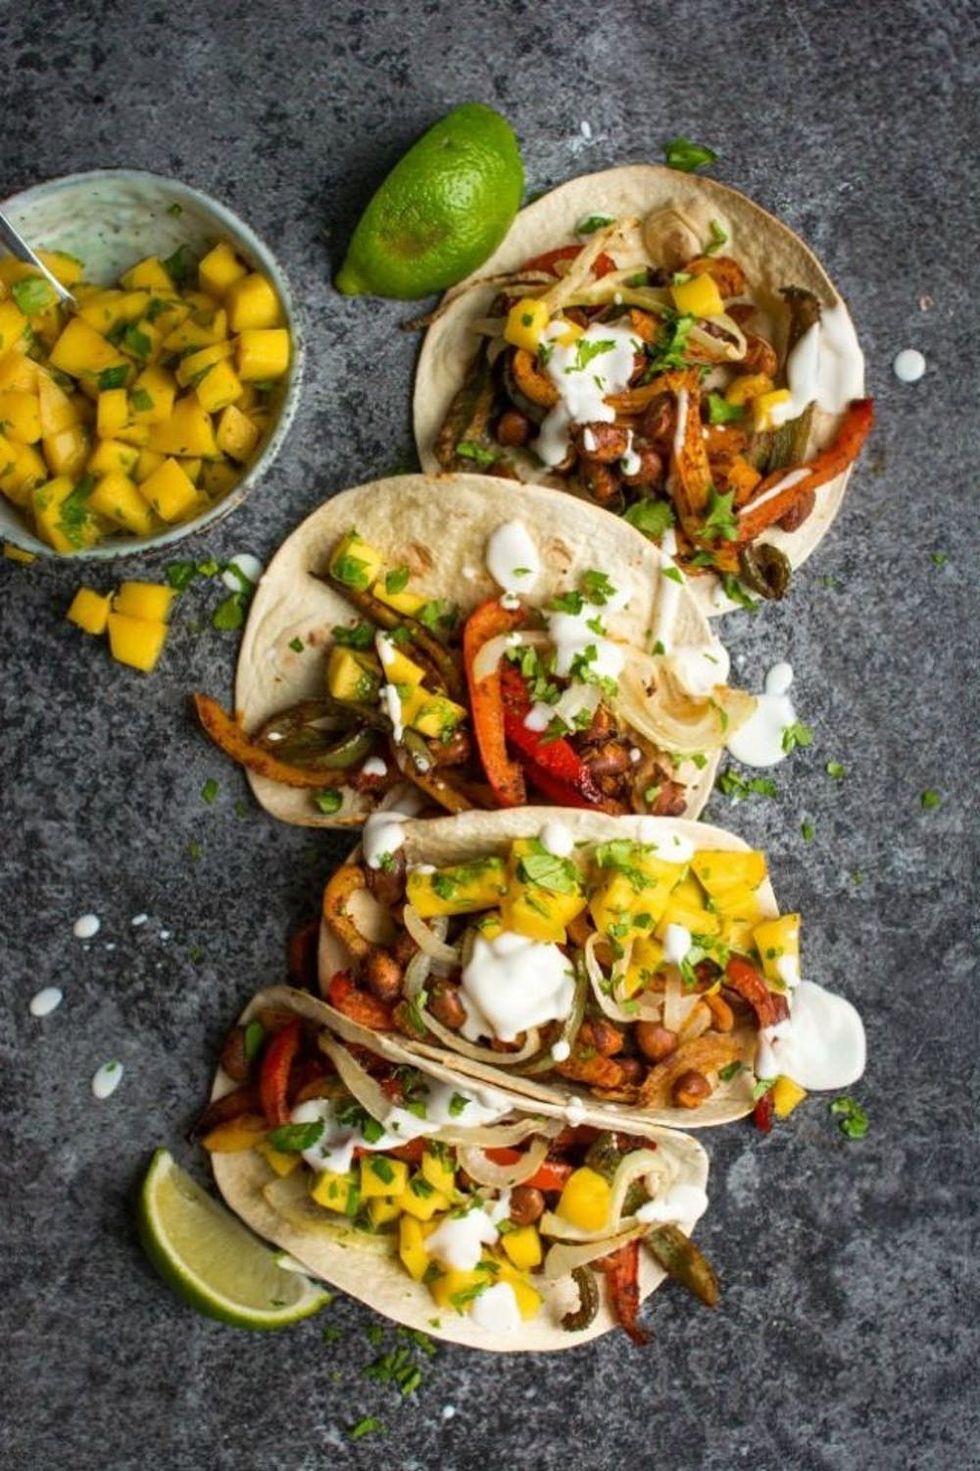 21 Vegan Taco Recipes That Don’t Come from a Box - Brit + Co